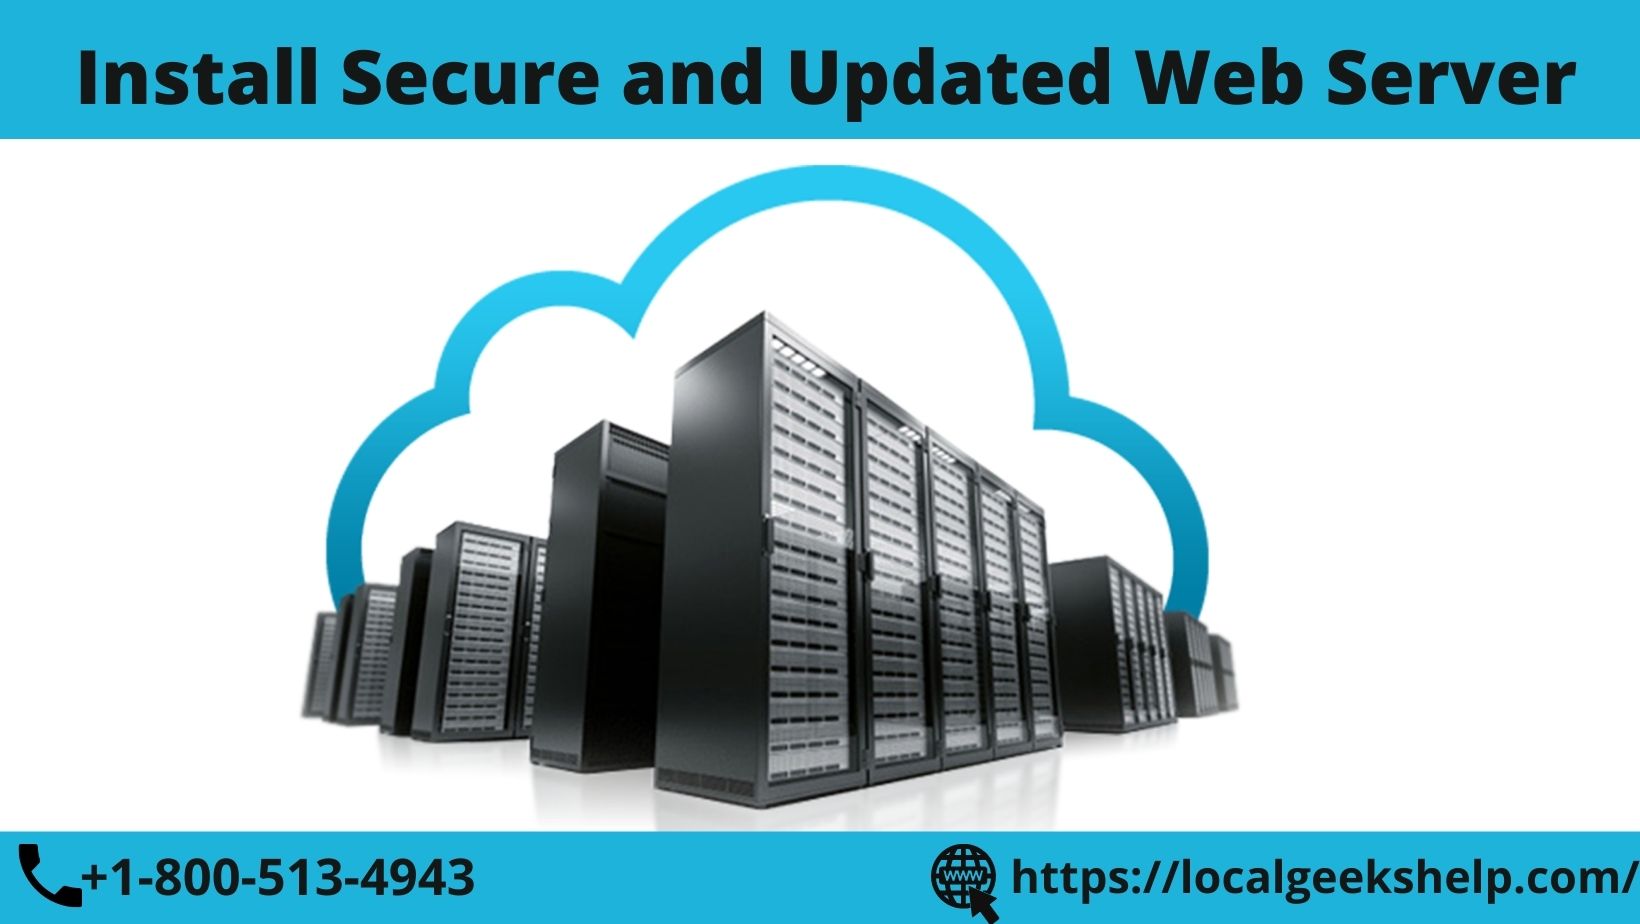 Install Secure and Updated Web Server